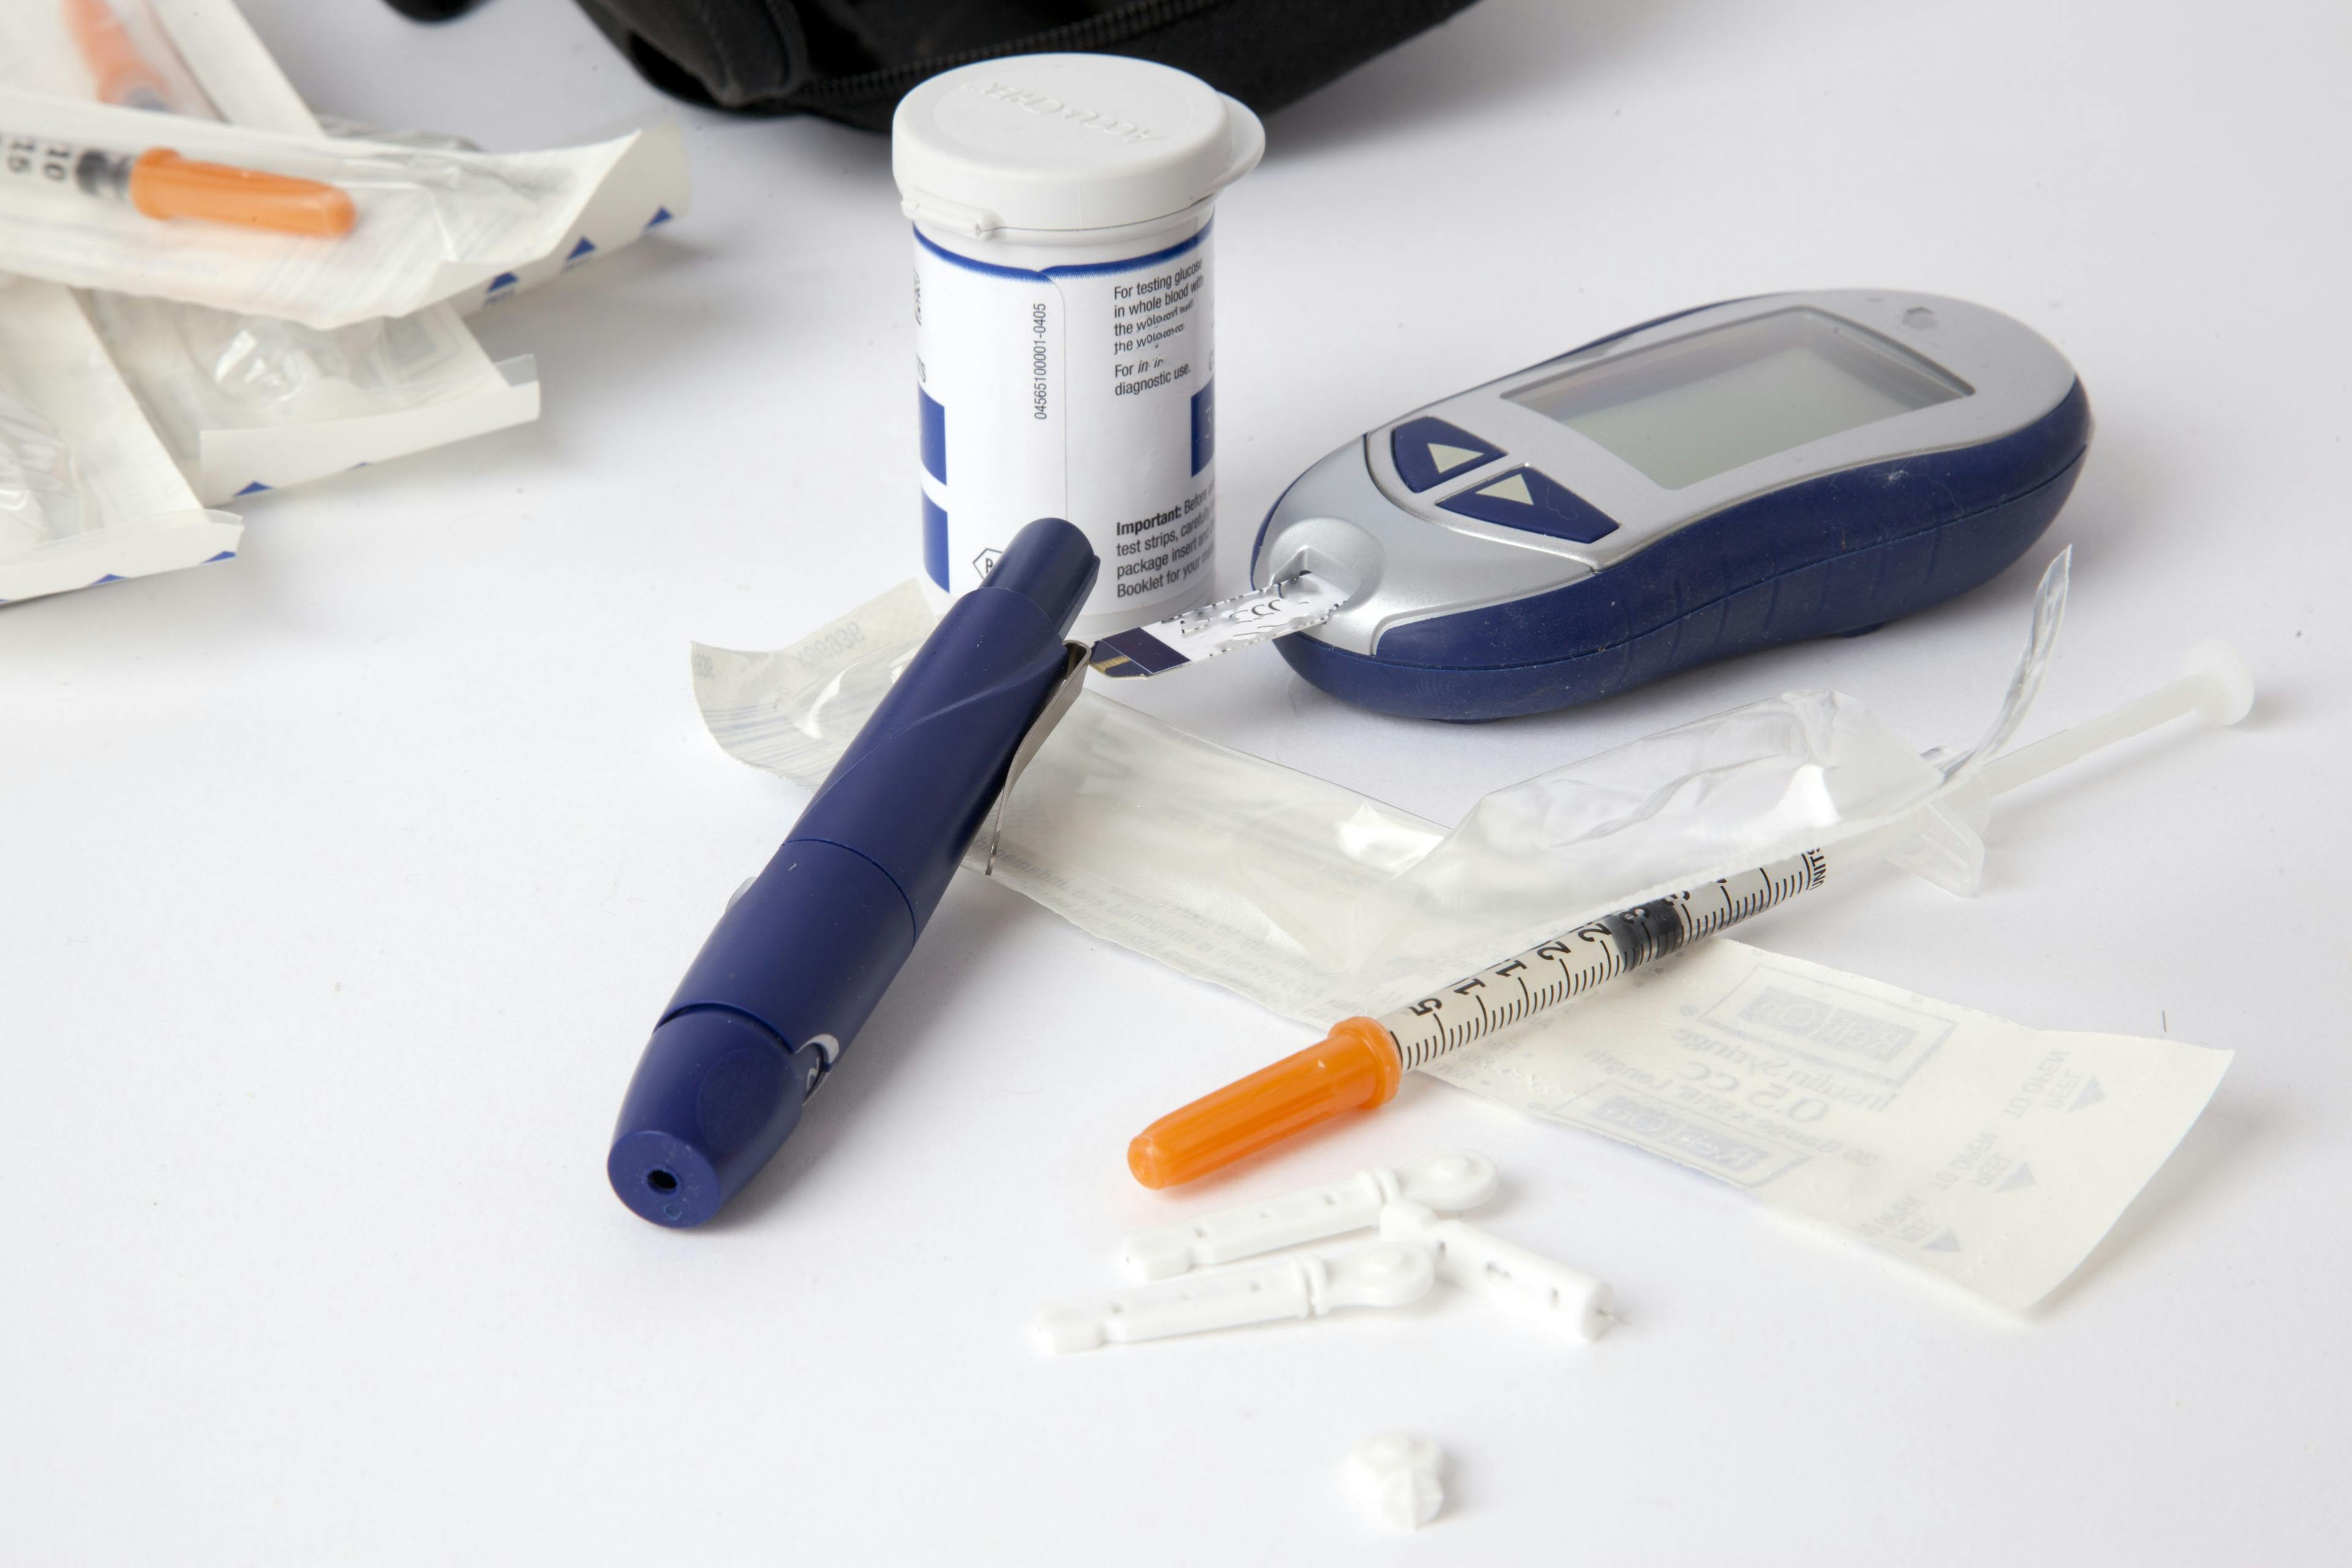 Diabetes Remission Occurs in About 1-in-20, Scottish Study Finds